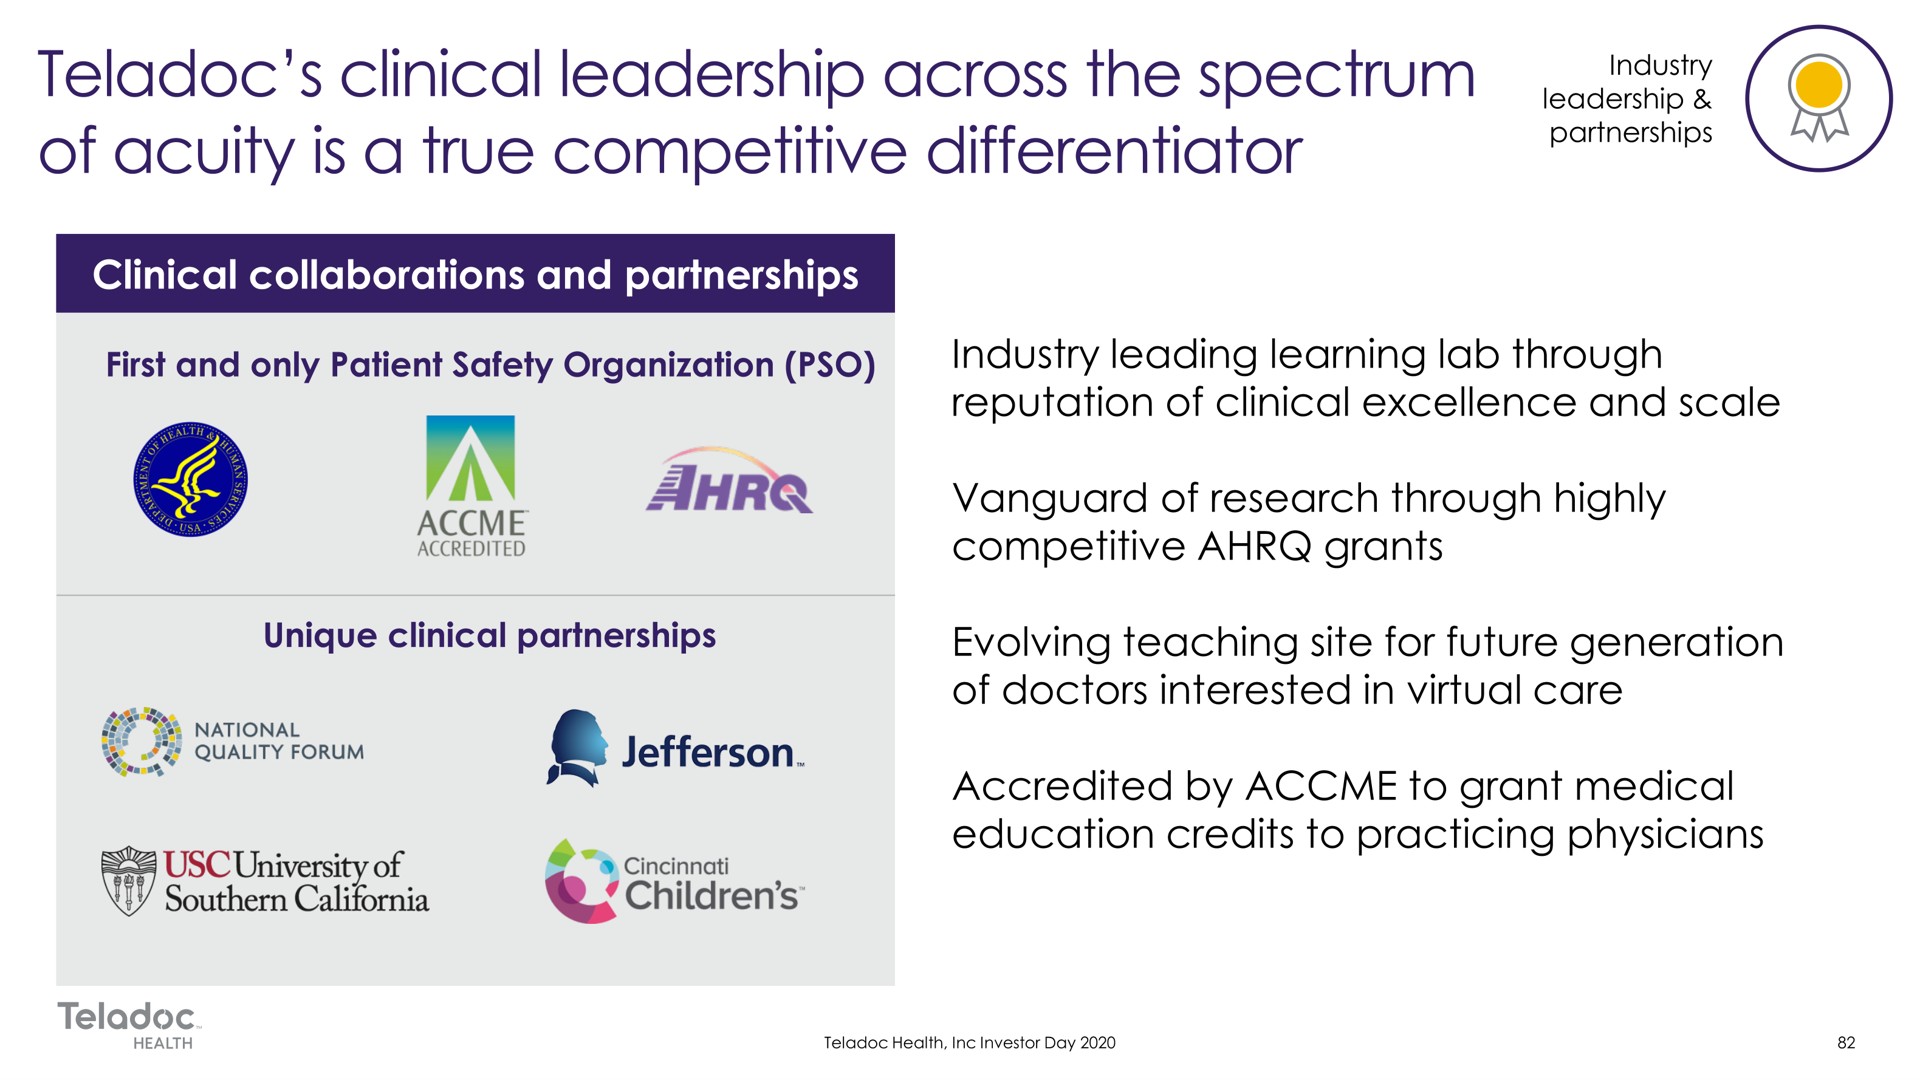 clinical leadership across the spectrum true differentiator of acuity is | Teladoc